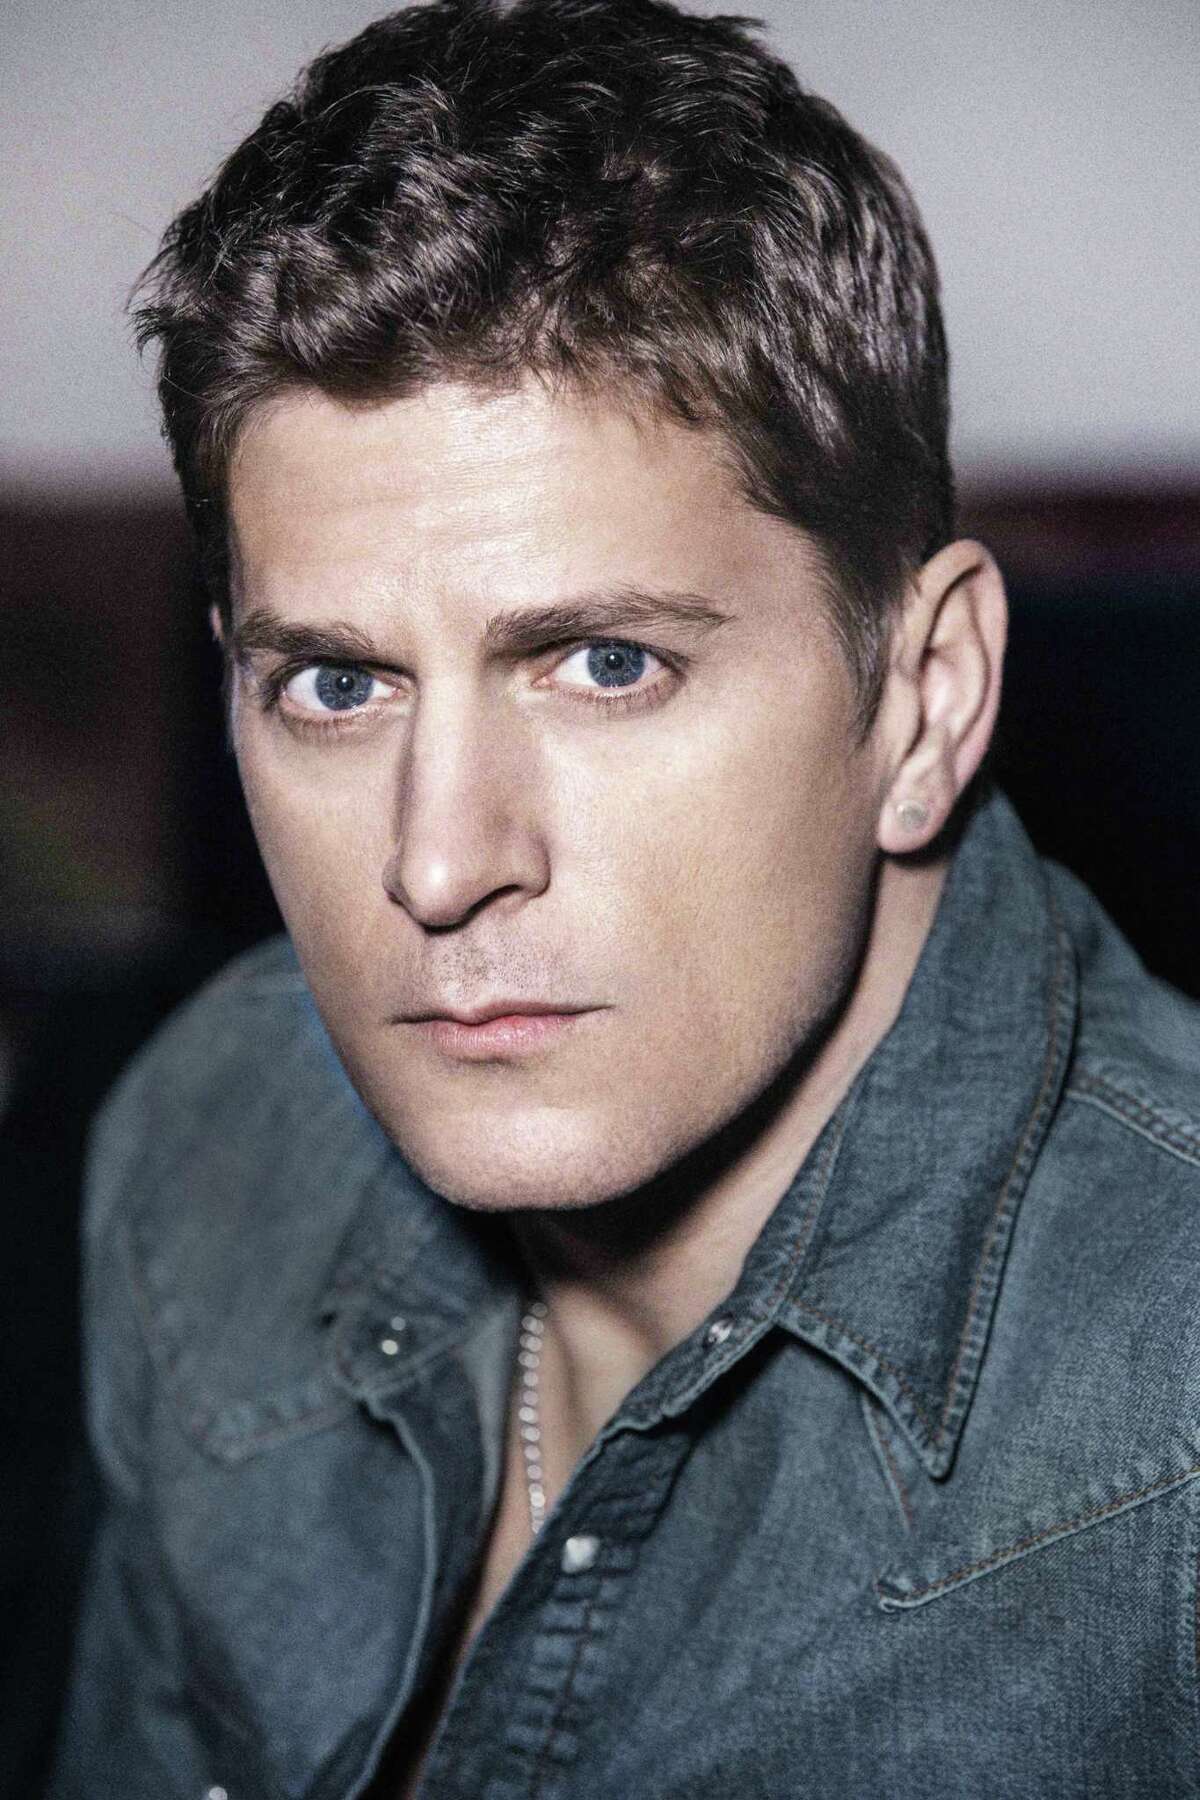 Matchbox Twenty, fronted by Rob Thomas, seen here, is touring with Counting Crows. Both bands will perform at Hartford’s Xfinity Theatre on Saturday, Sept. 2.